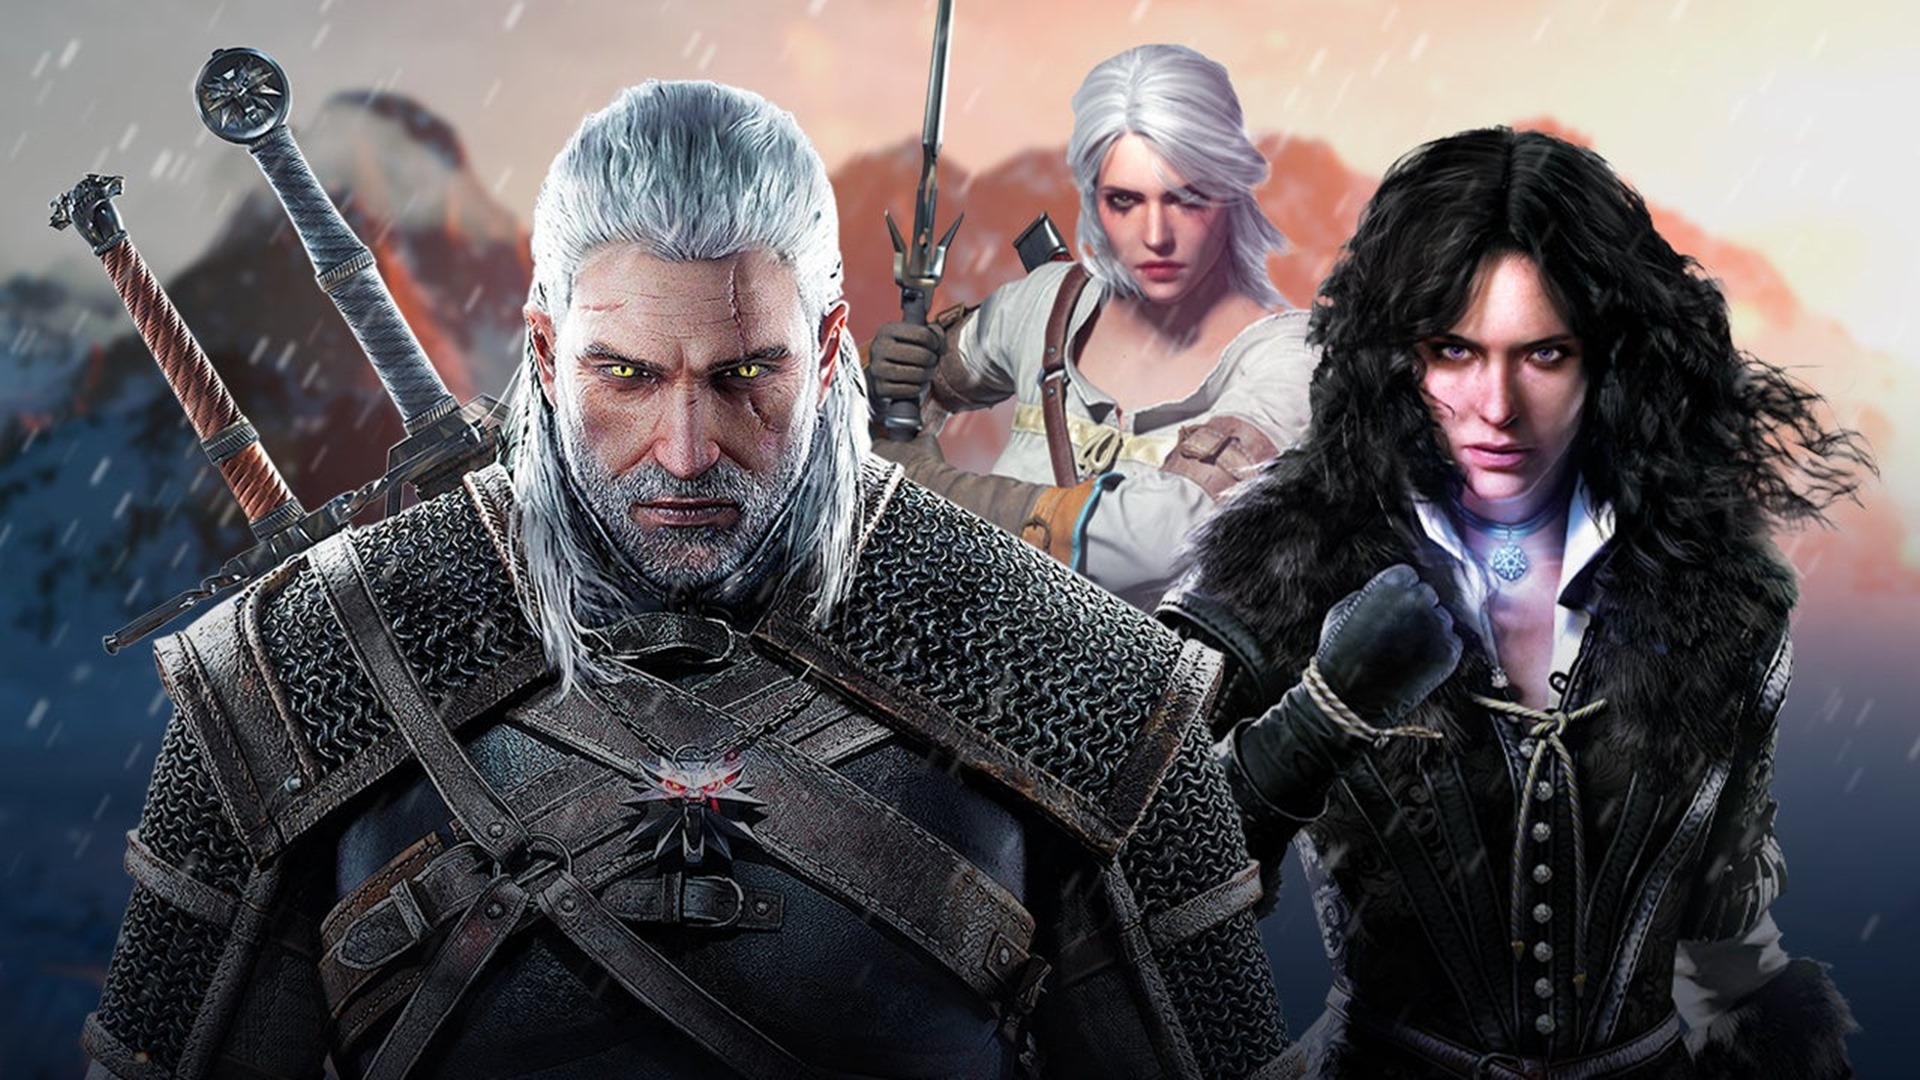 There are more than 400 developers working on the new The Witcher, according to CD Projekt RED.